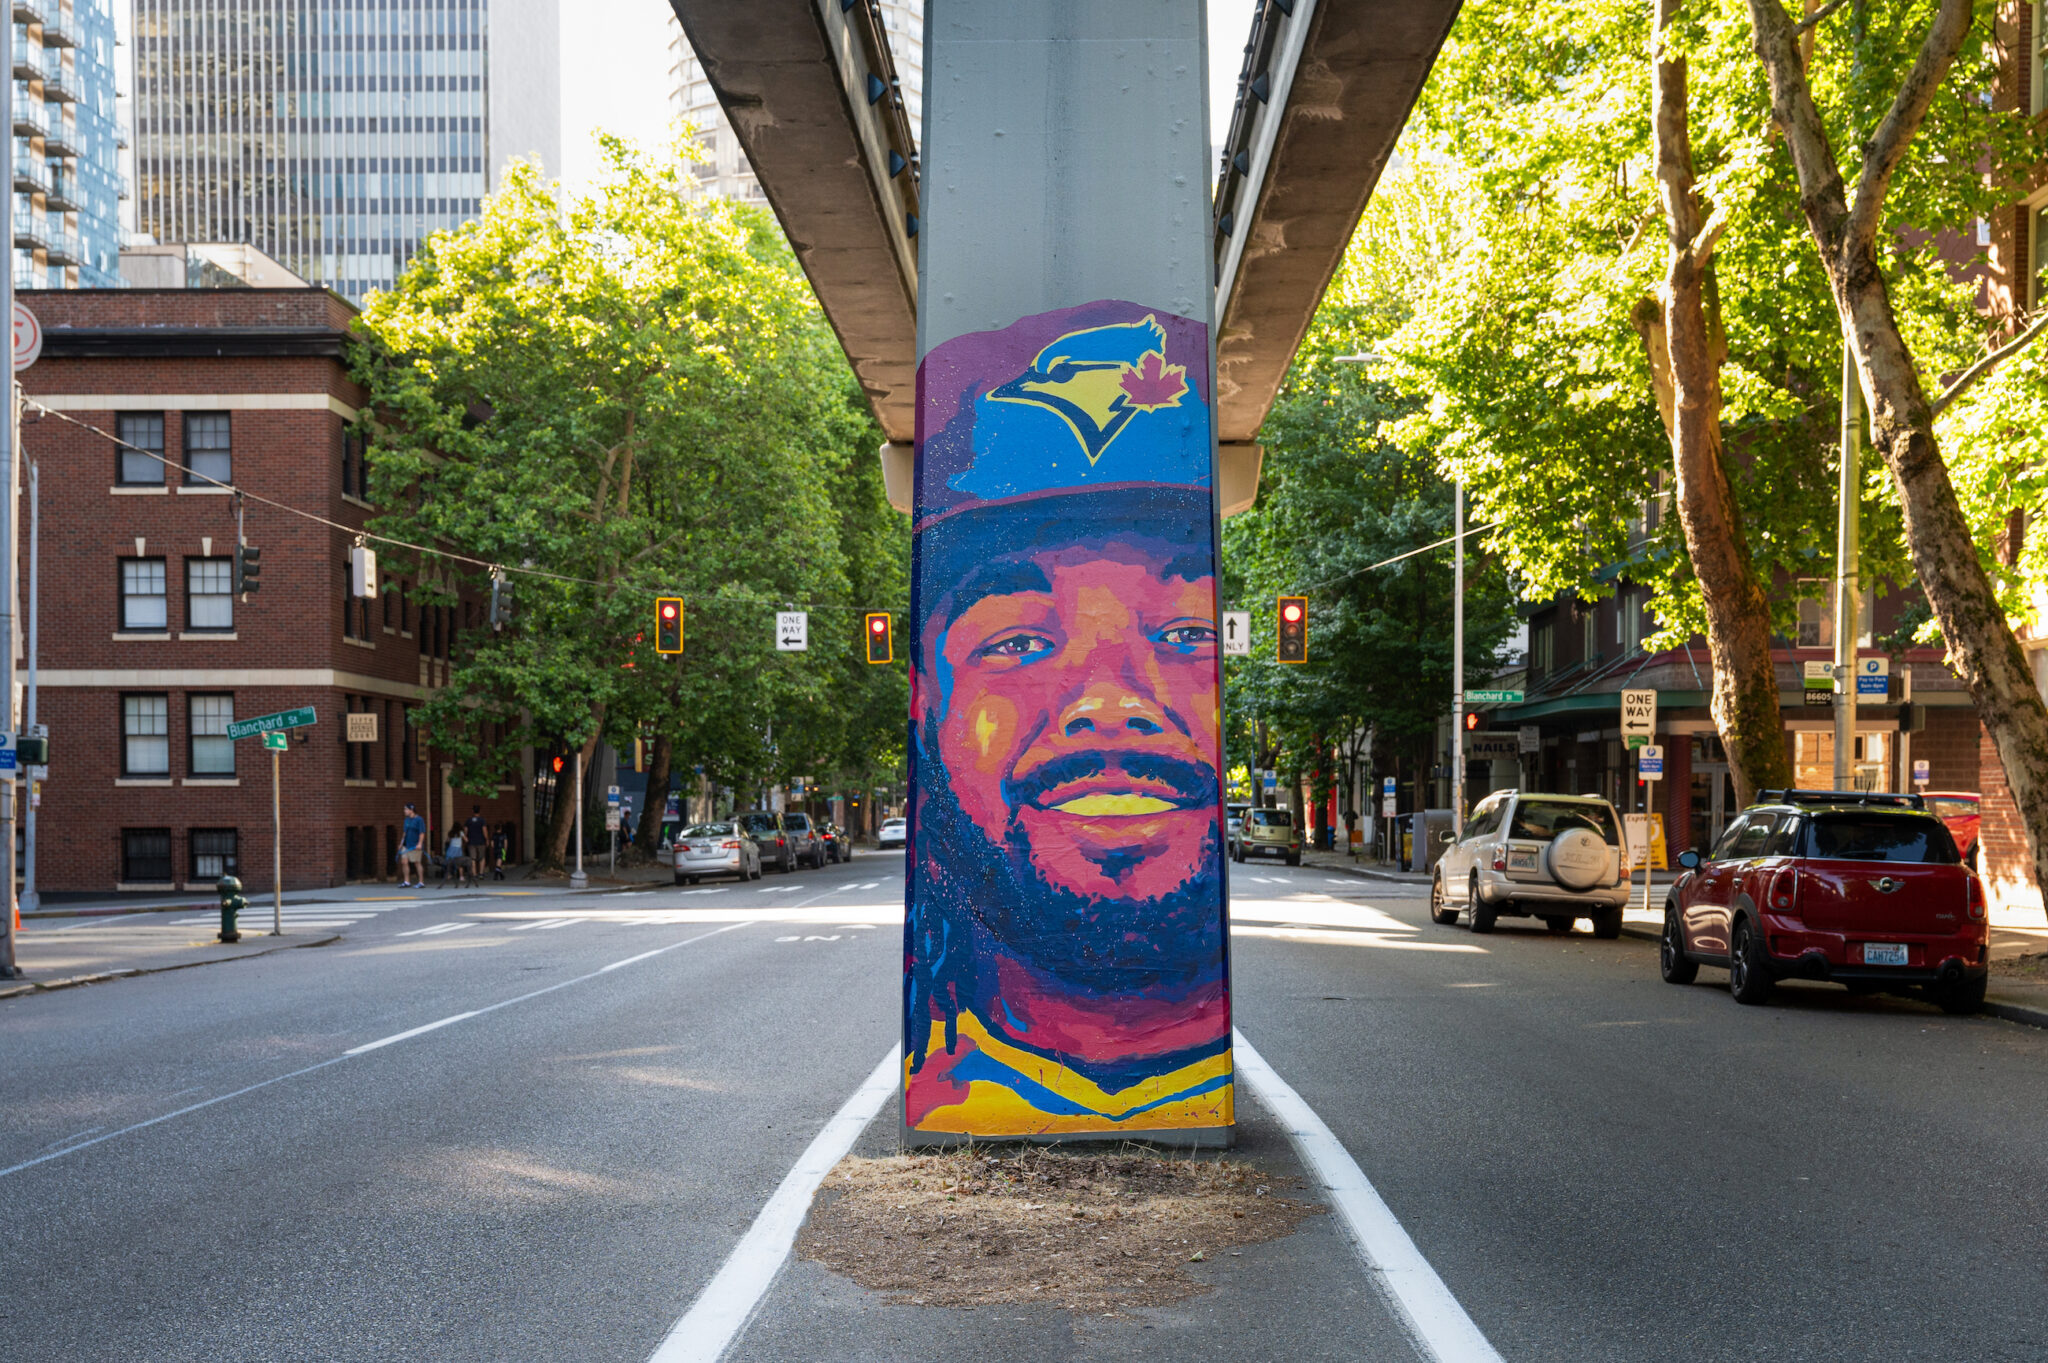 Toronto Blue Jays player mural along 5th Ave